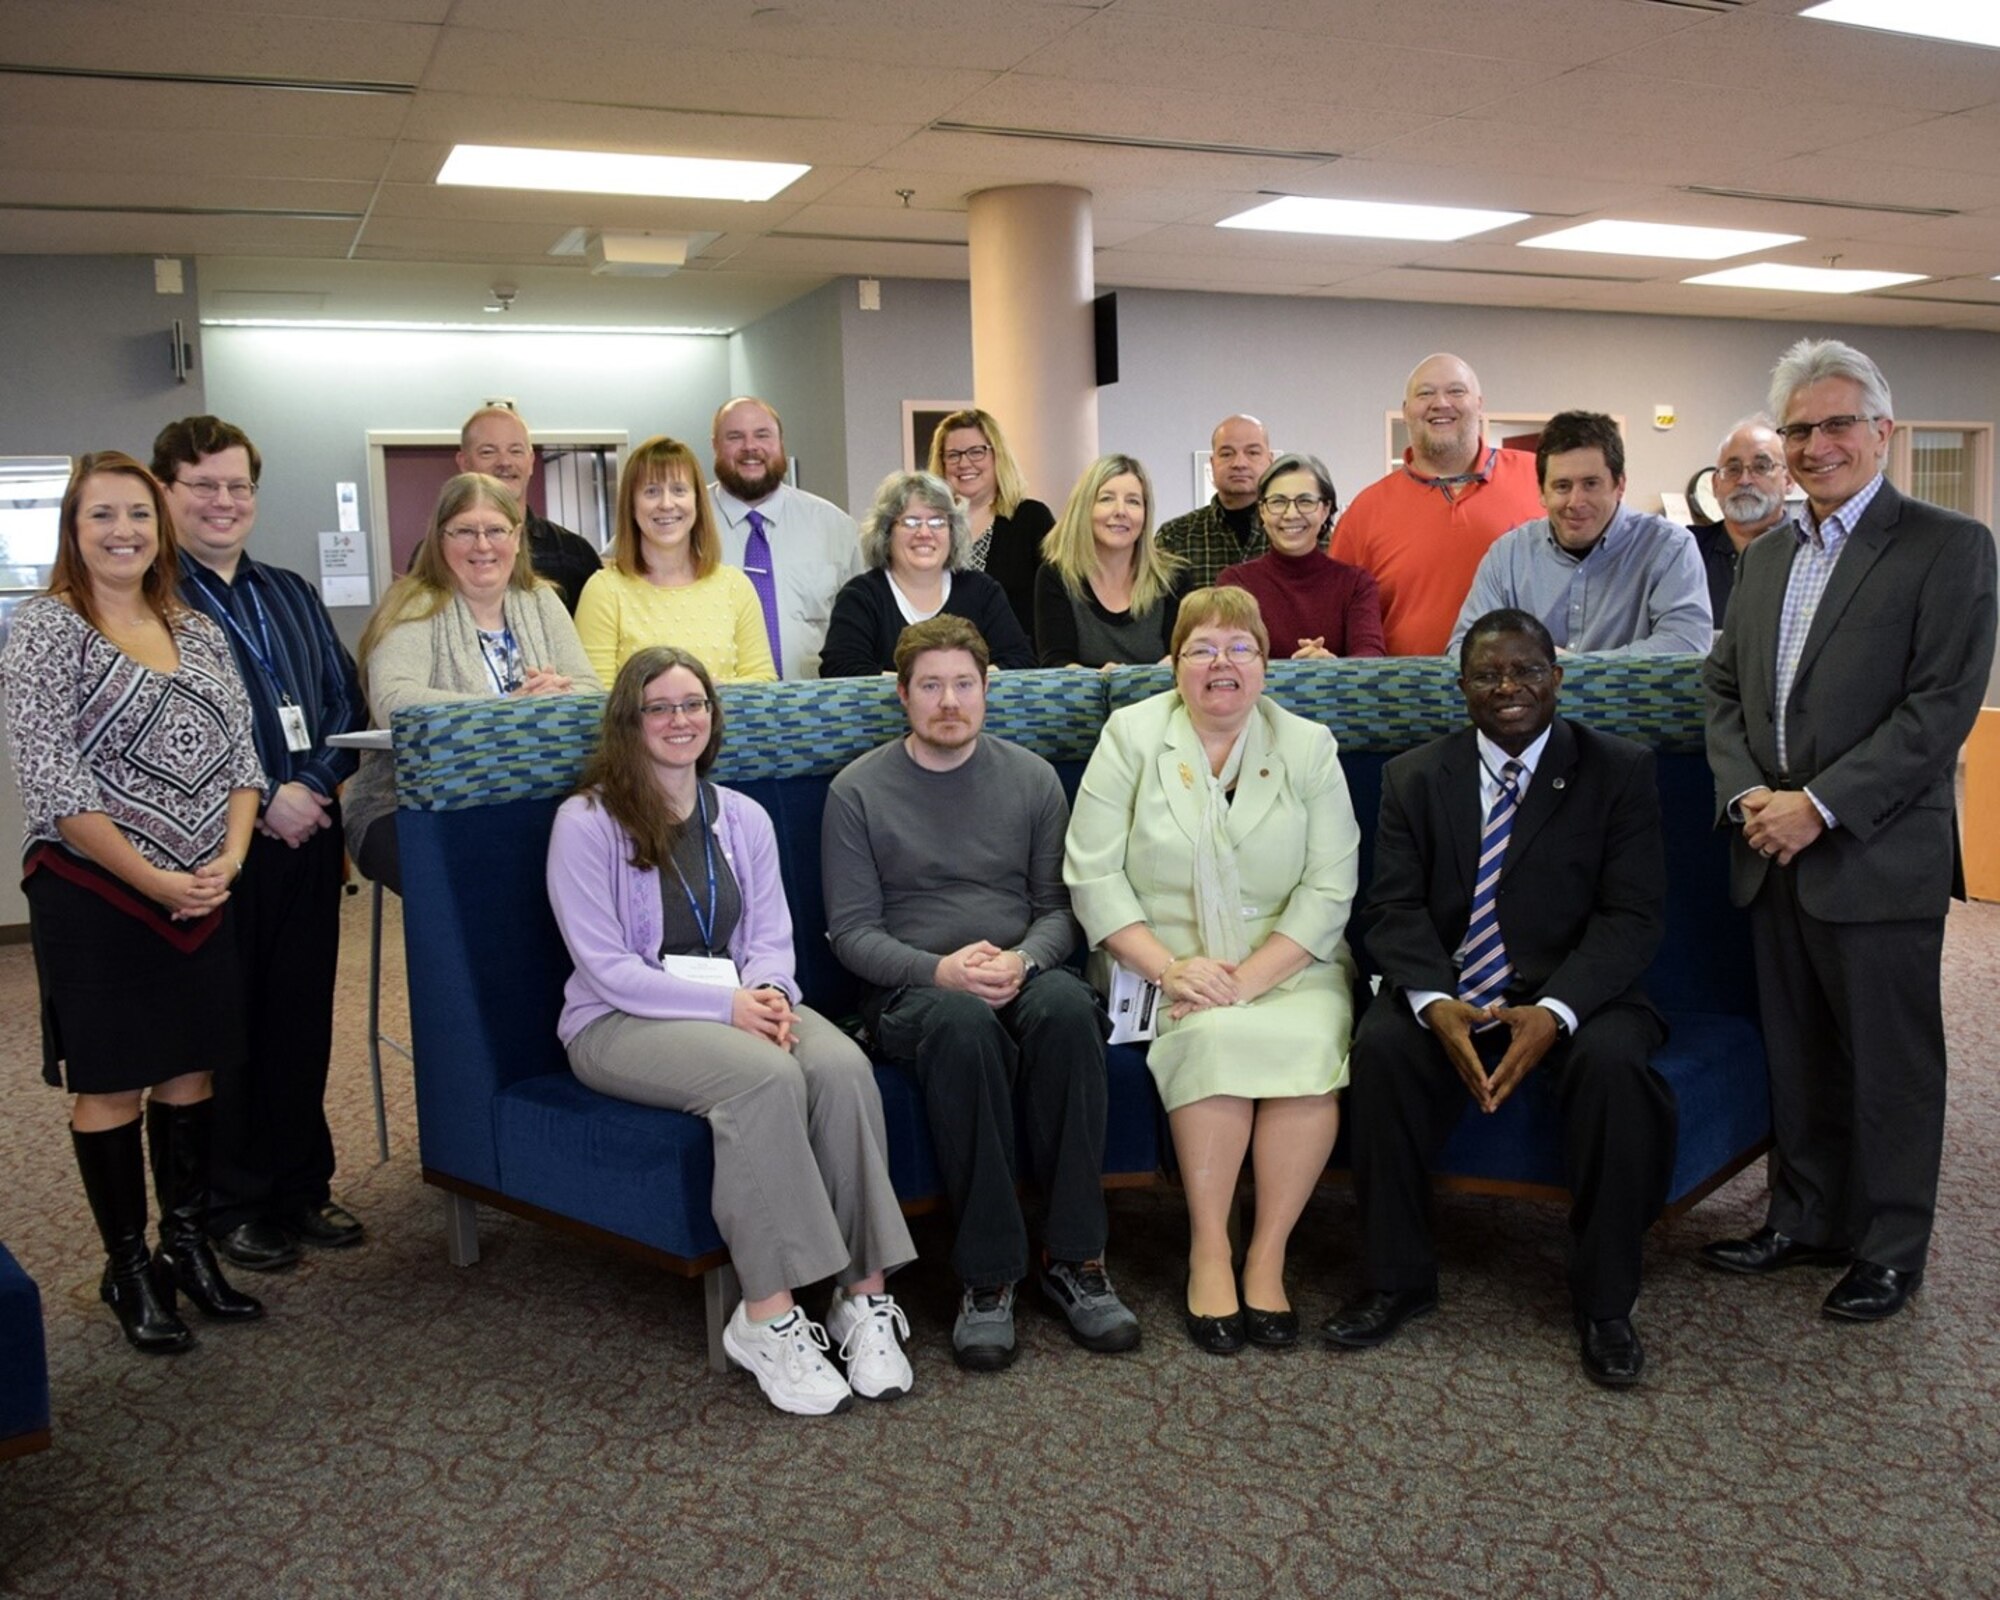 D’Azzo Research Library staff and leadership gathered in honor of National Library Worker’s Day in April 2018.  The joint AFIT/AFRL library received the 2019 Federal Library/Information Centers of the Year award in the large library/information center category. (U.S. Air Force photo by Katie Scott)